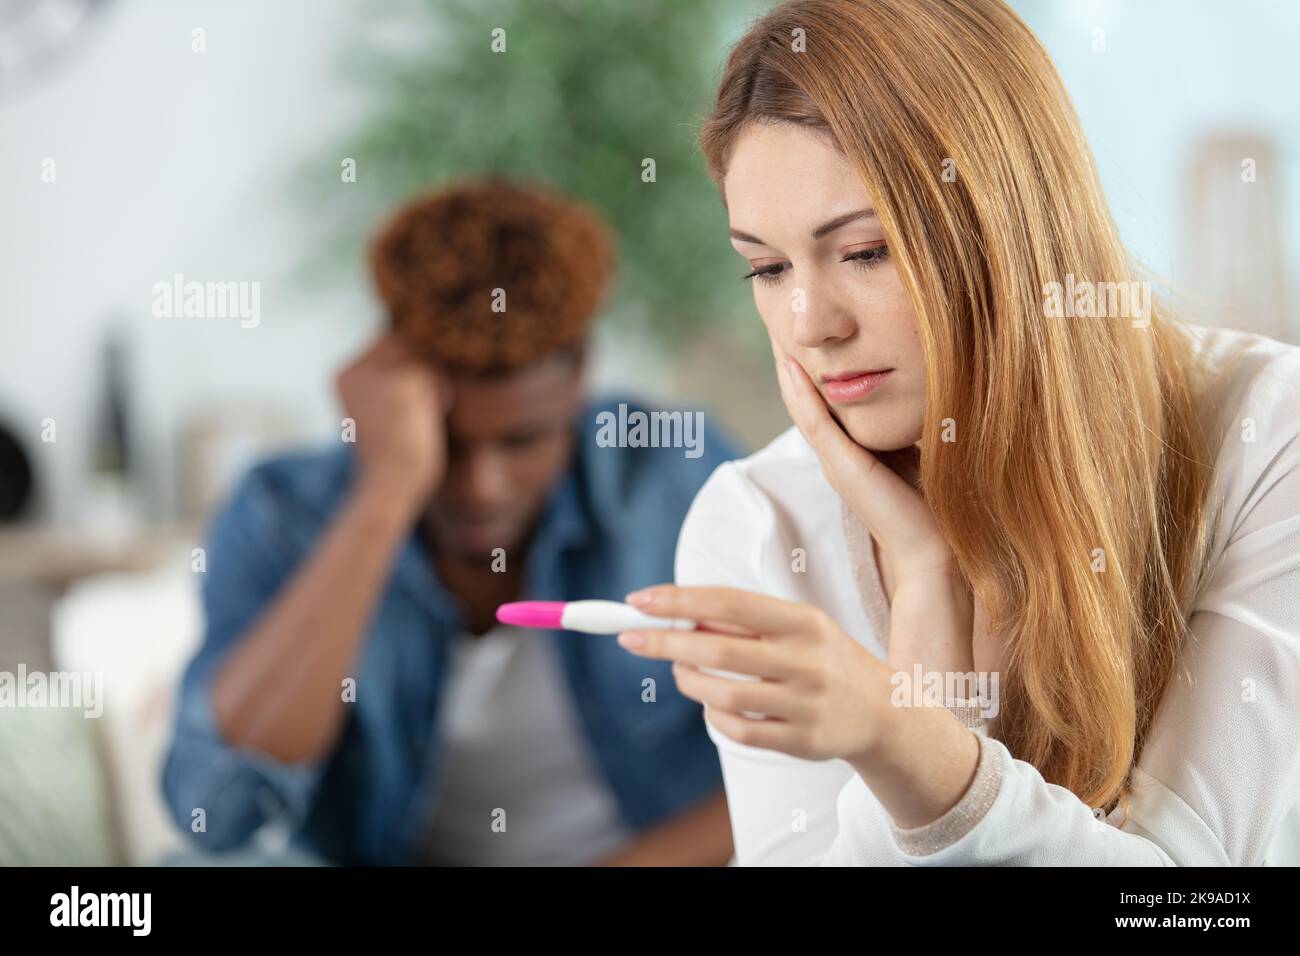 young woman looking at a home pregnancy test kit Stock Photo